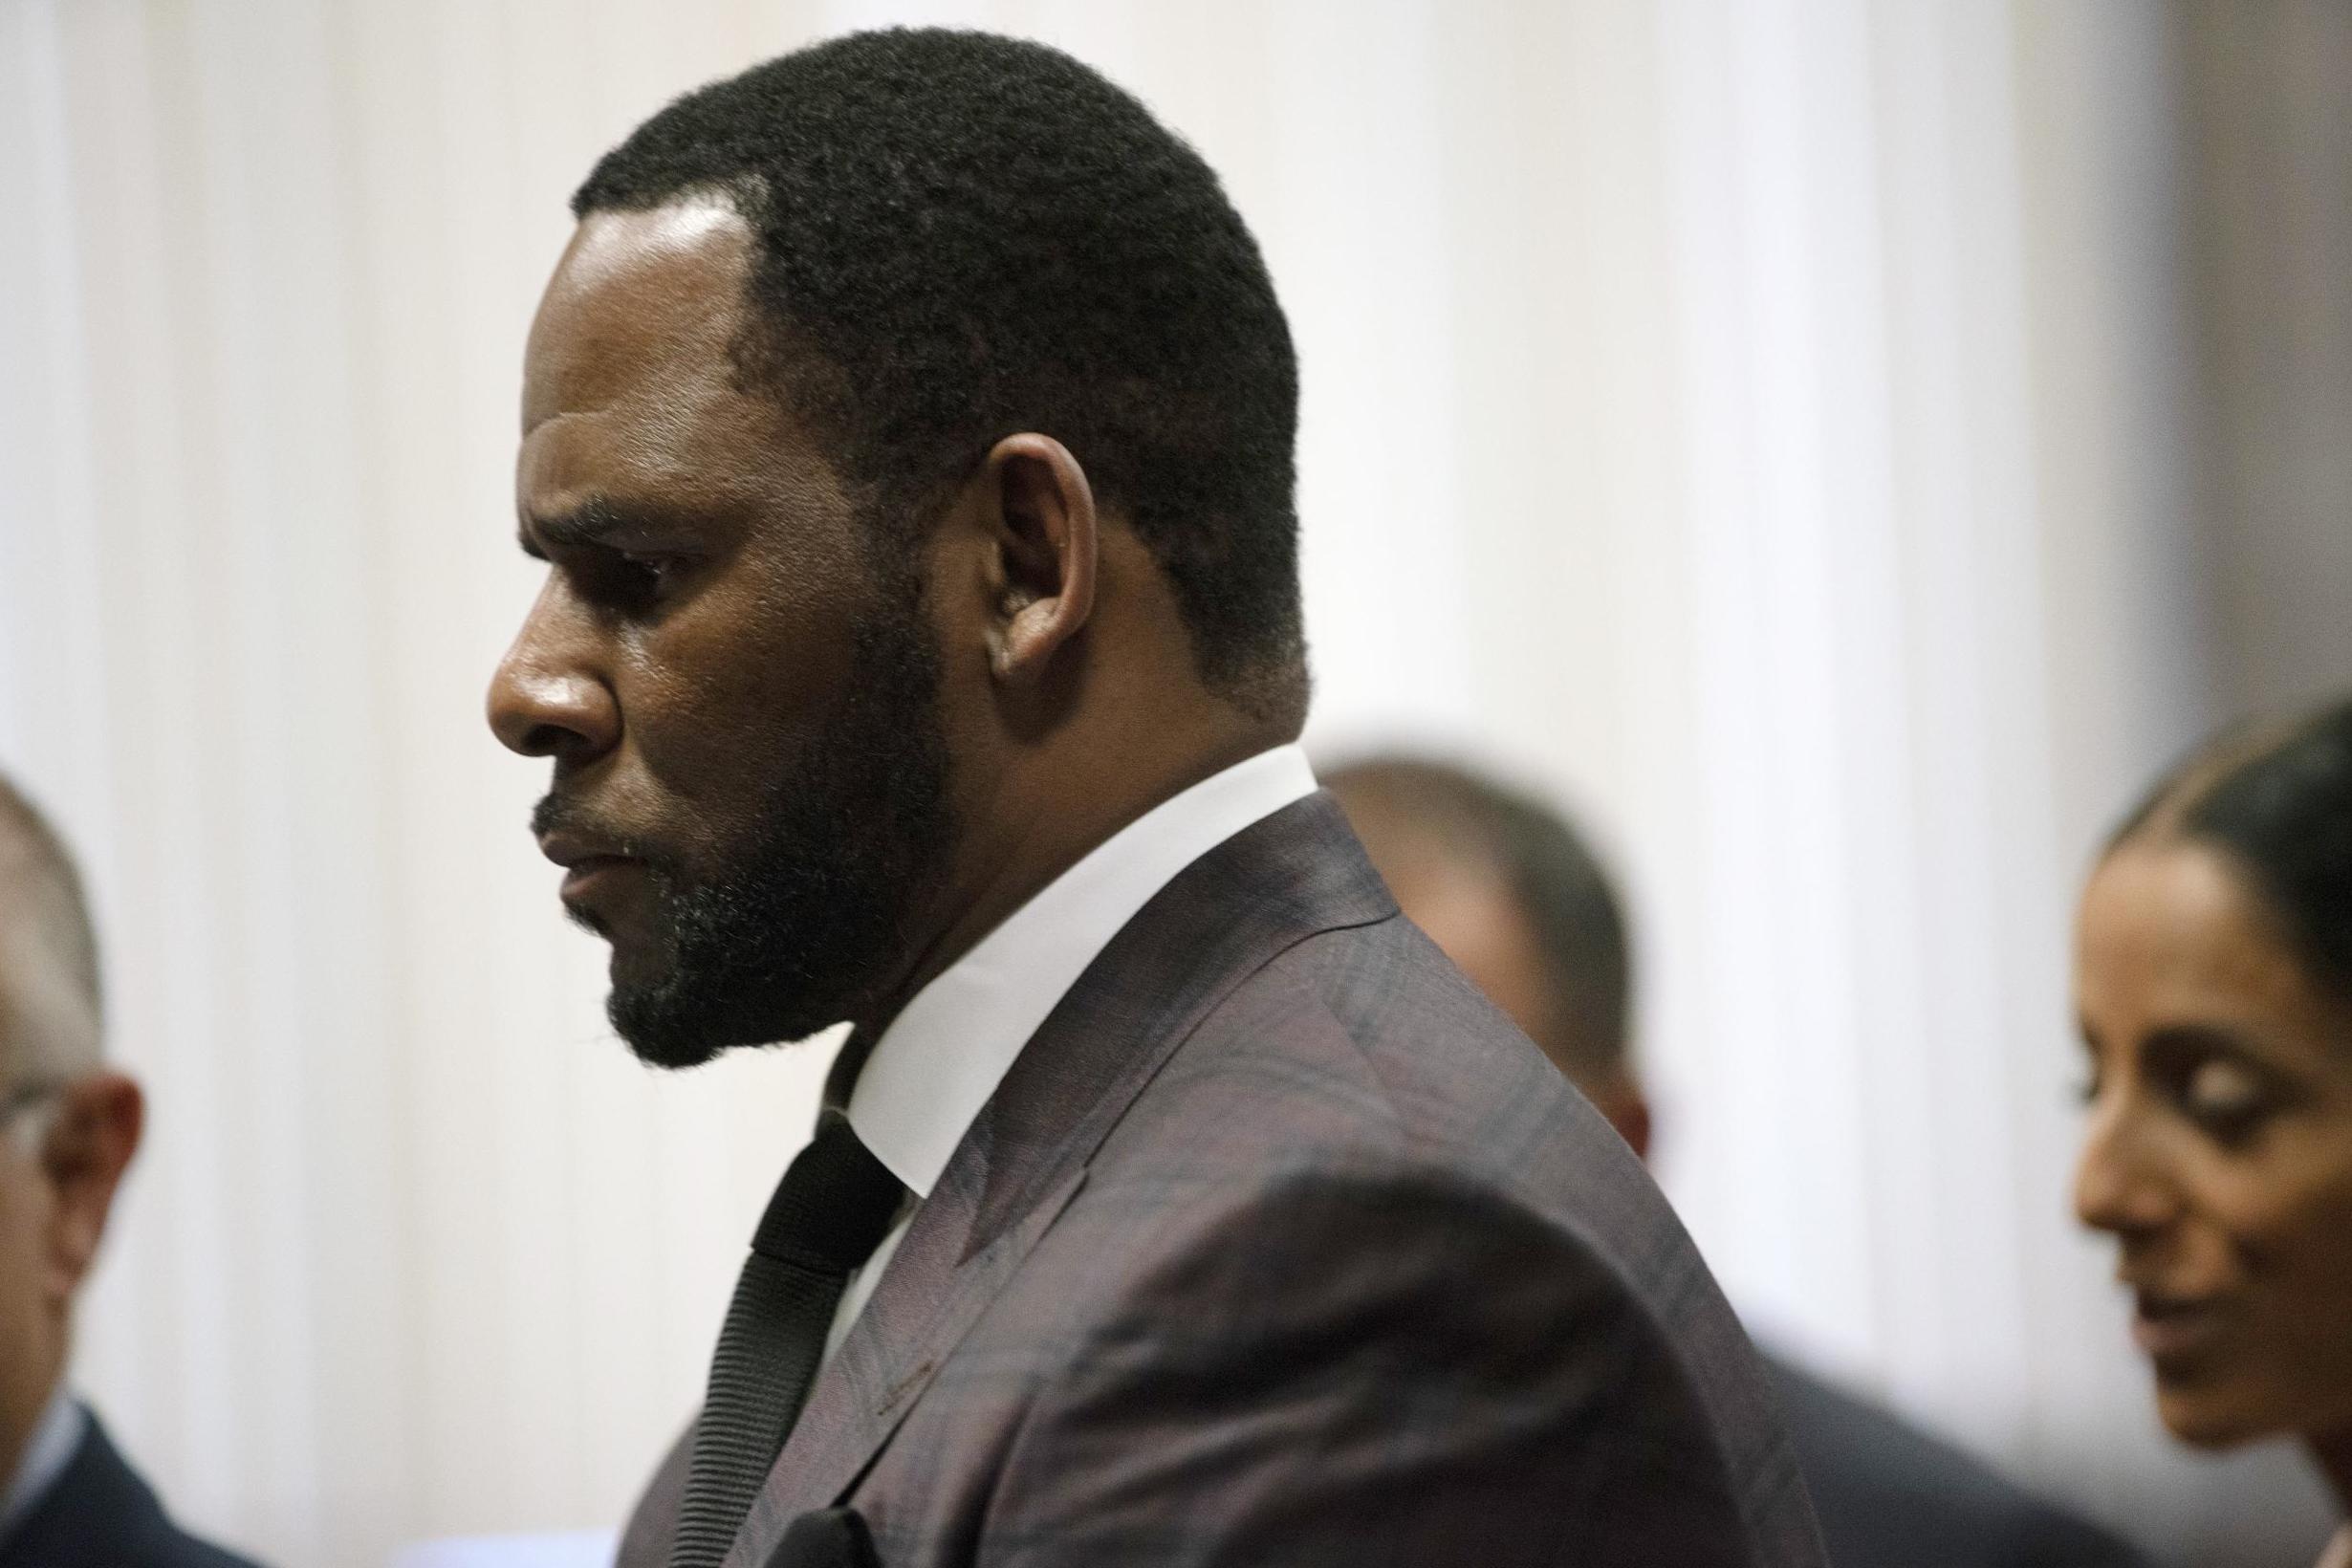 R Kelly during a court hearing on 26 June 2019 in Chicago, Illinois.